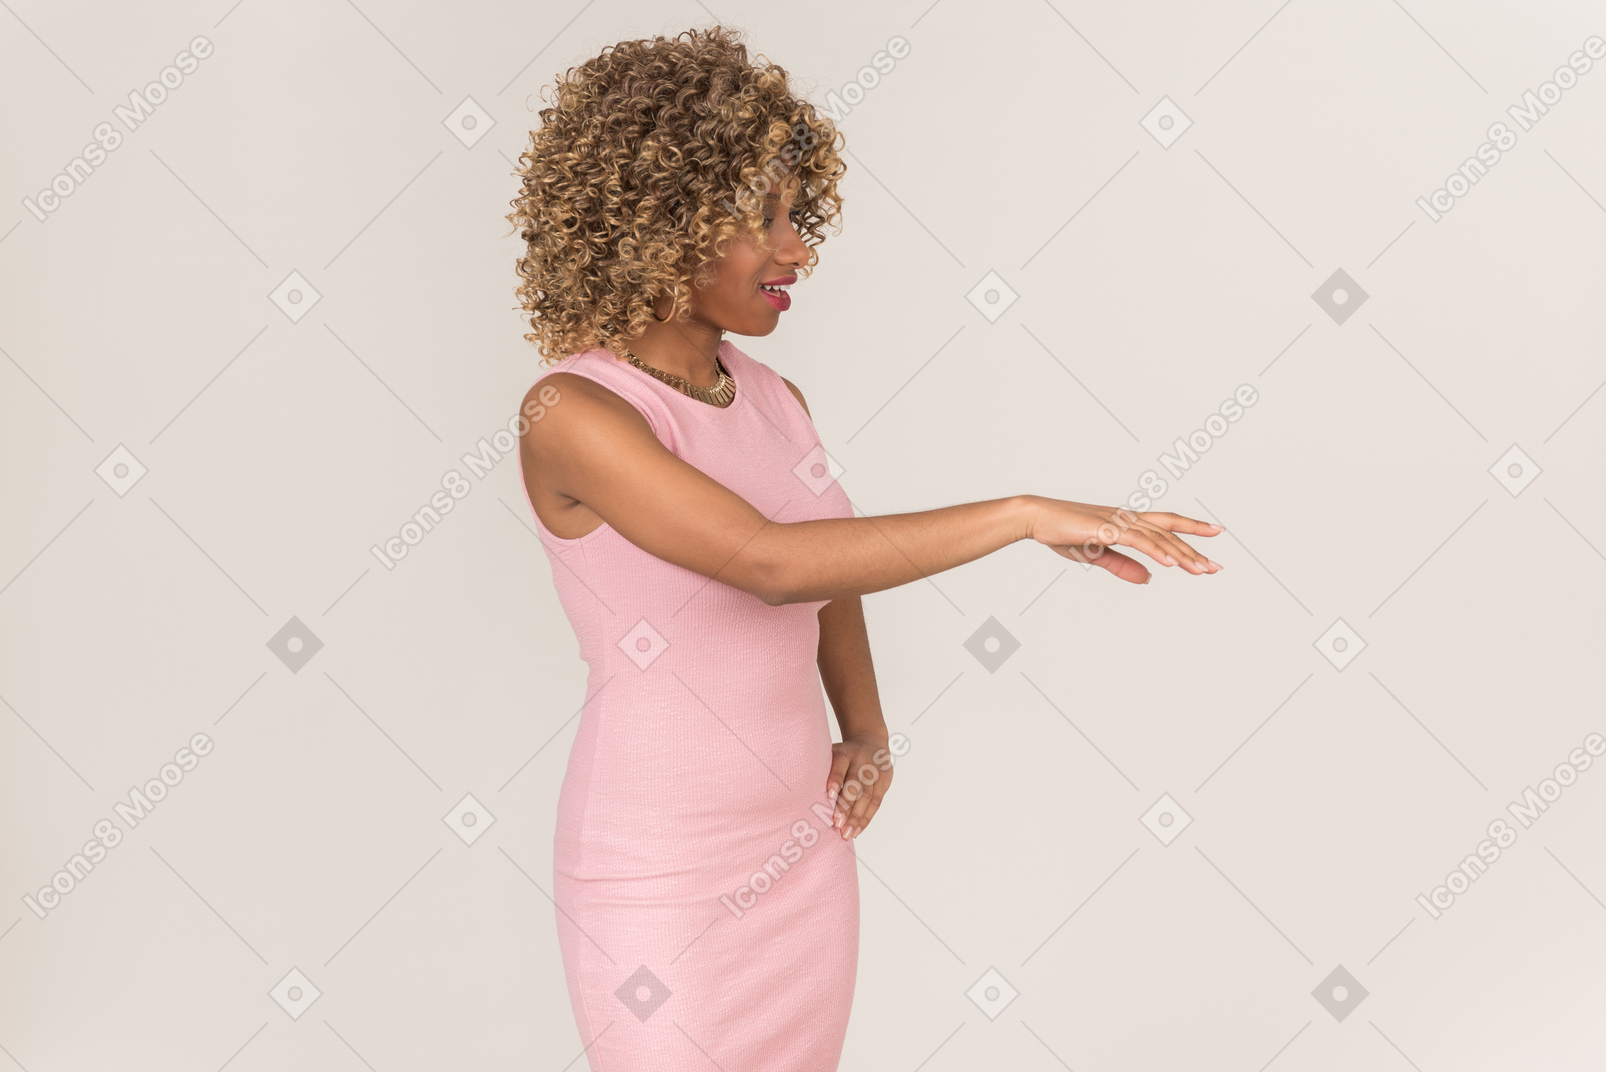 A woman in pink dress lifting an arm